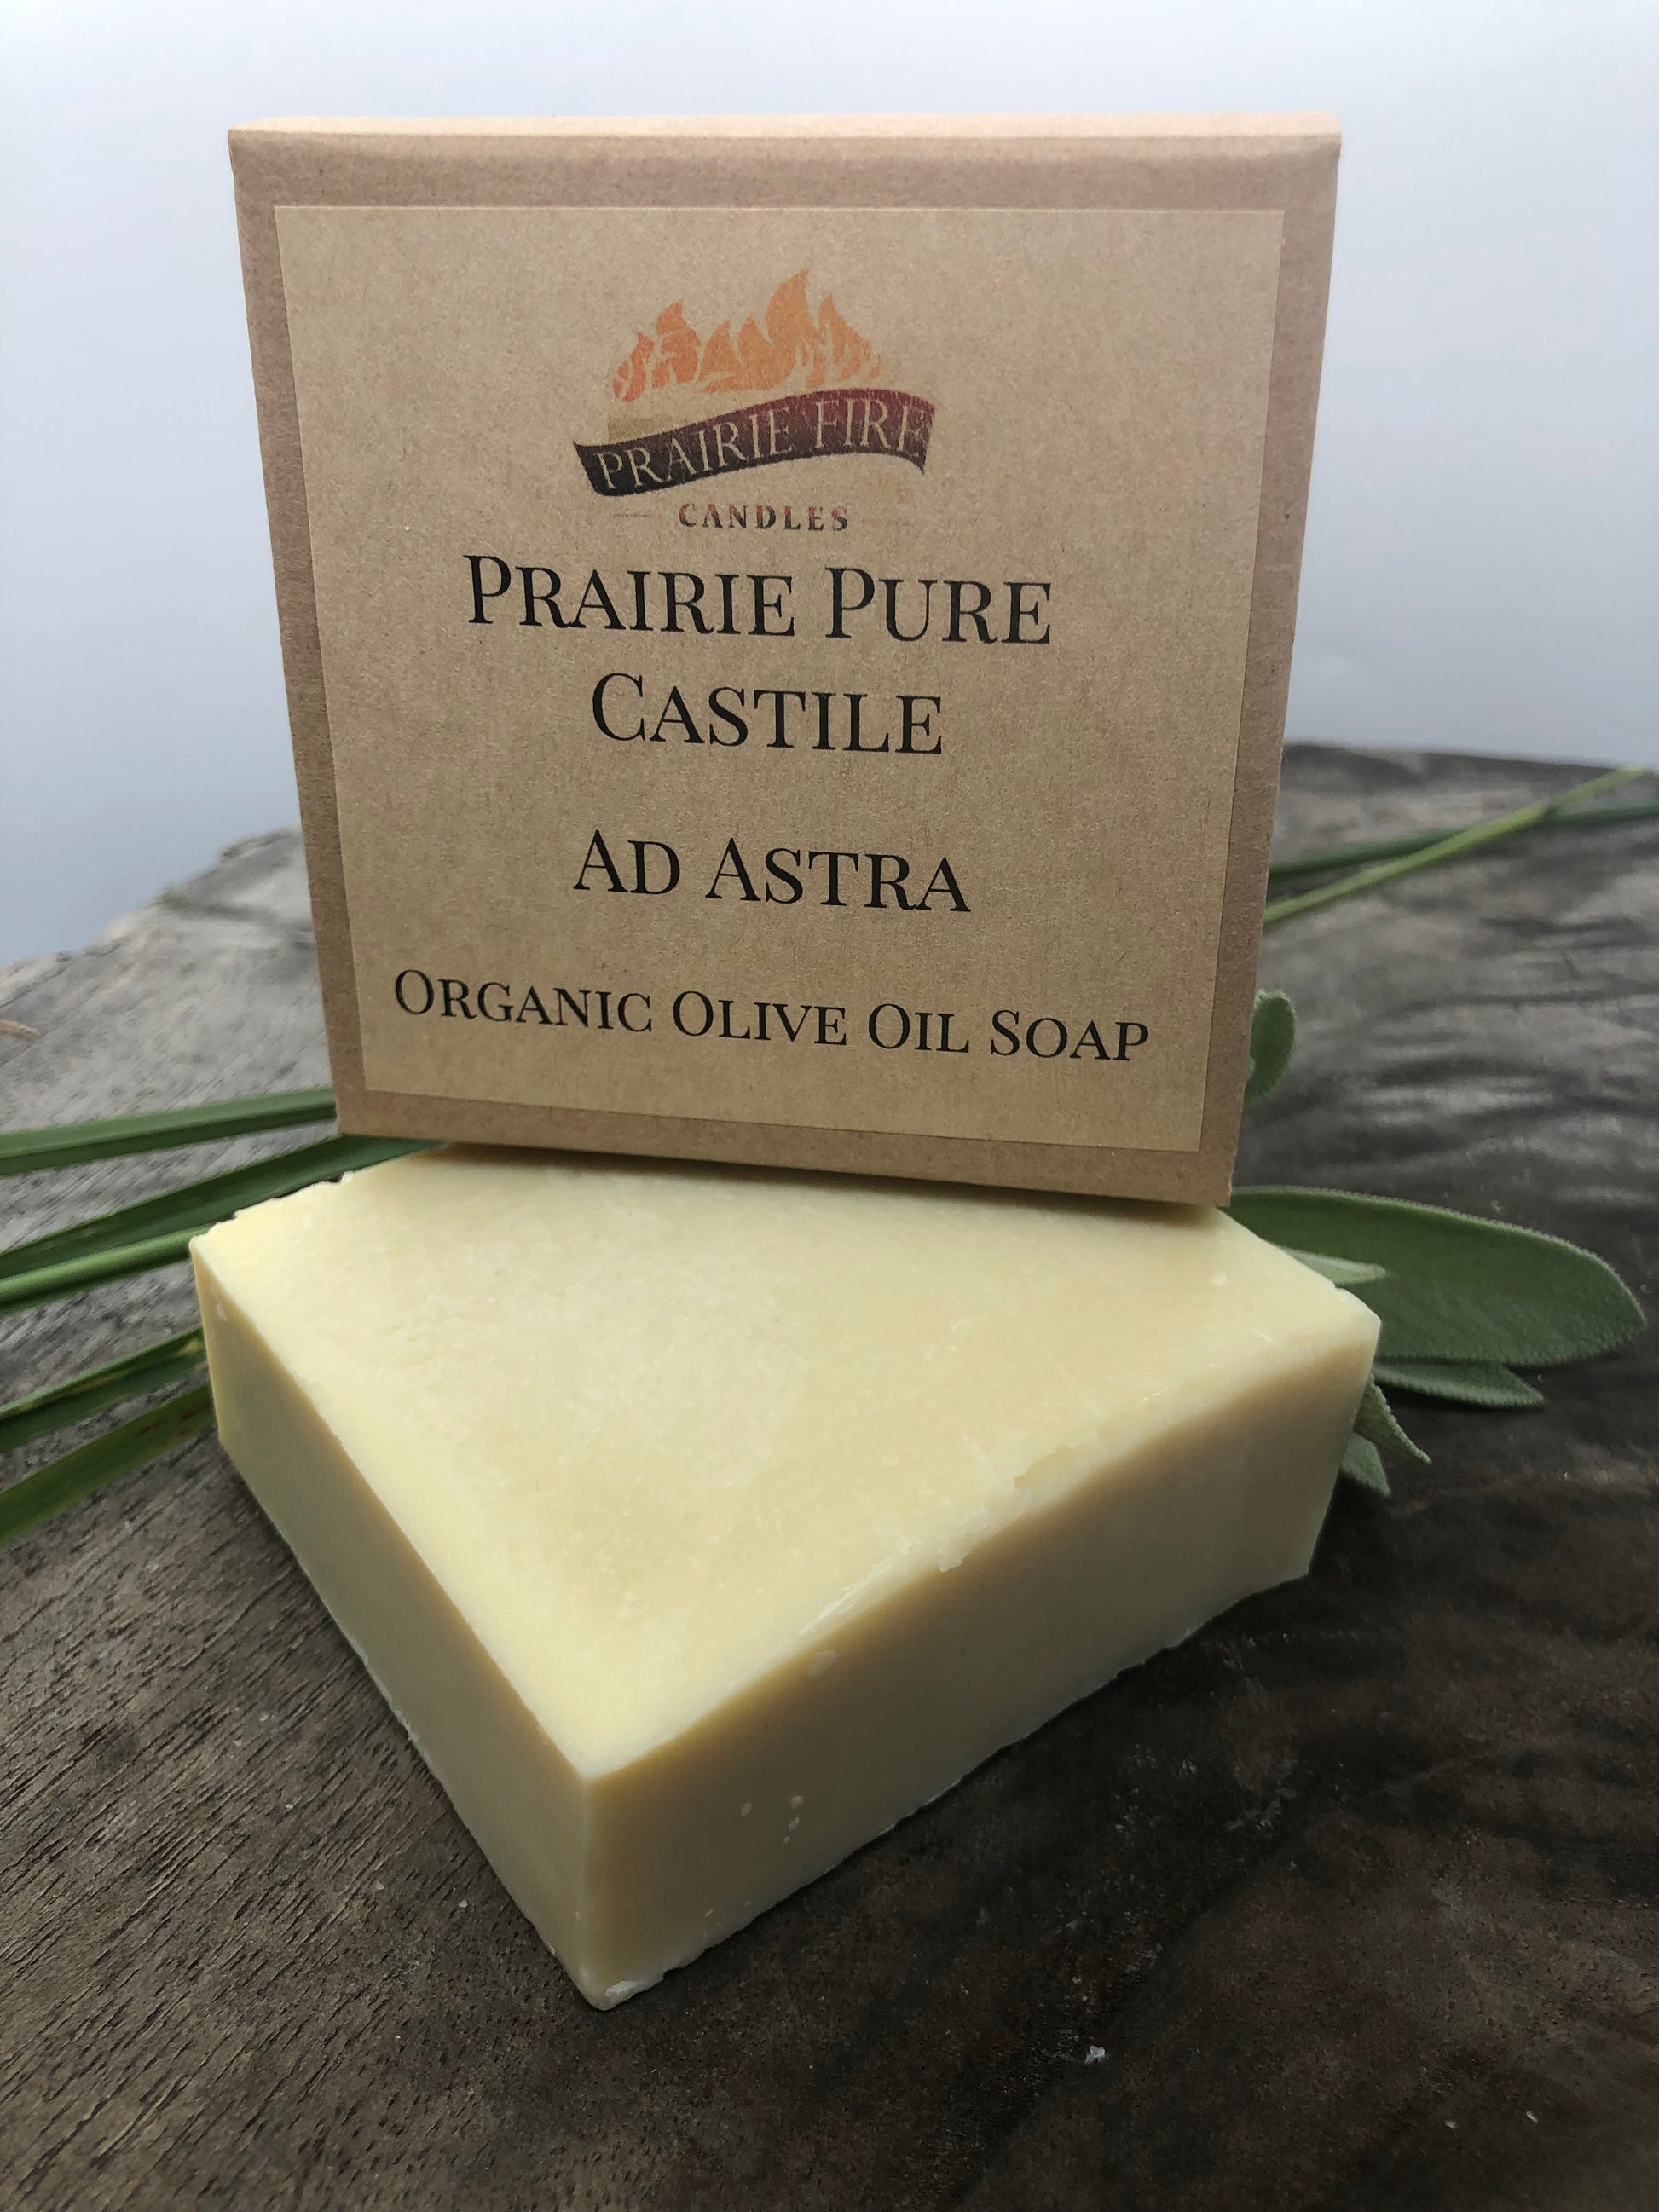 Ad Astra Real Castile Organic Olive Oil Soap for Sensitive Skin - Dye Free - 100% Certified Organic Extra Virgin Olive Oil-1